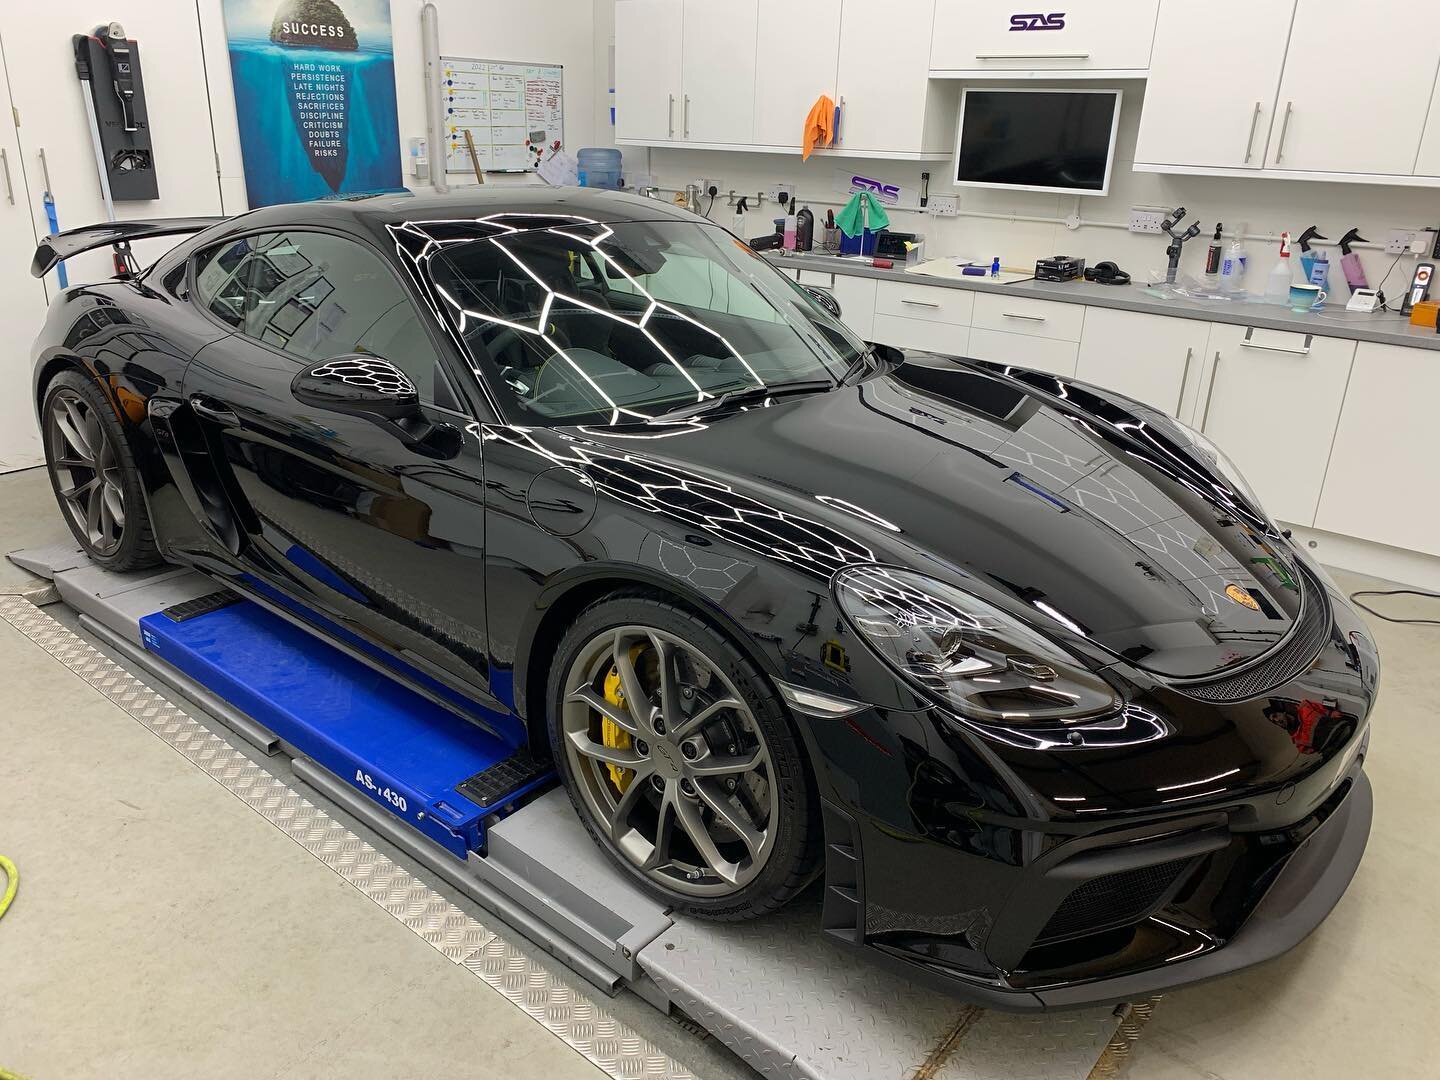 A new client by recommendation brought us this beautiful flat black gt4 for a full detail. Flat black is challenging and we both really enjoyed getting stuck into this one, the results speak for themselves 💎 #detailing #paintcorrection #ceramiccoati